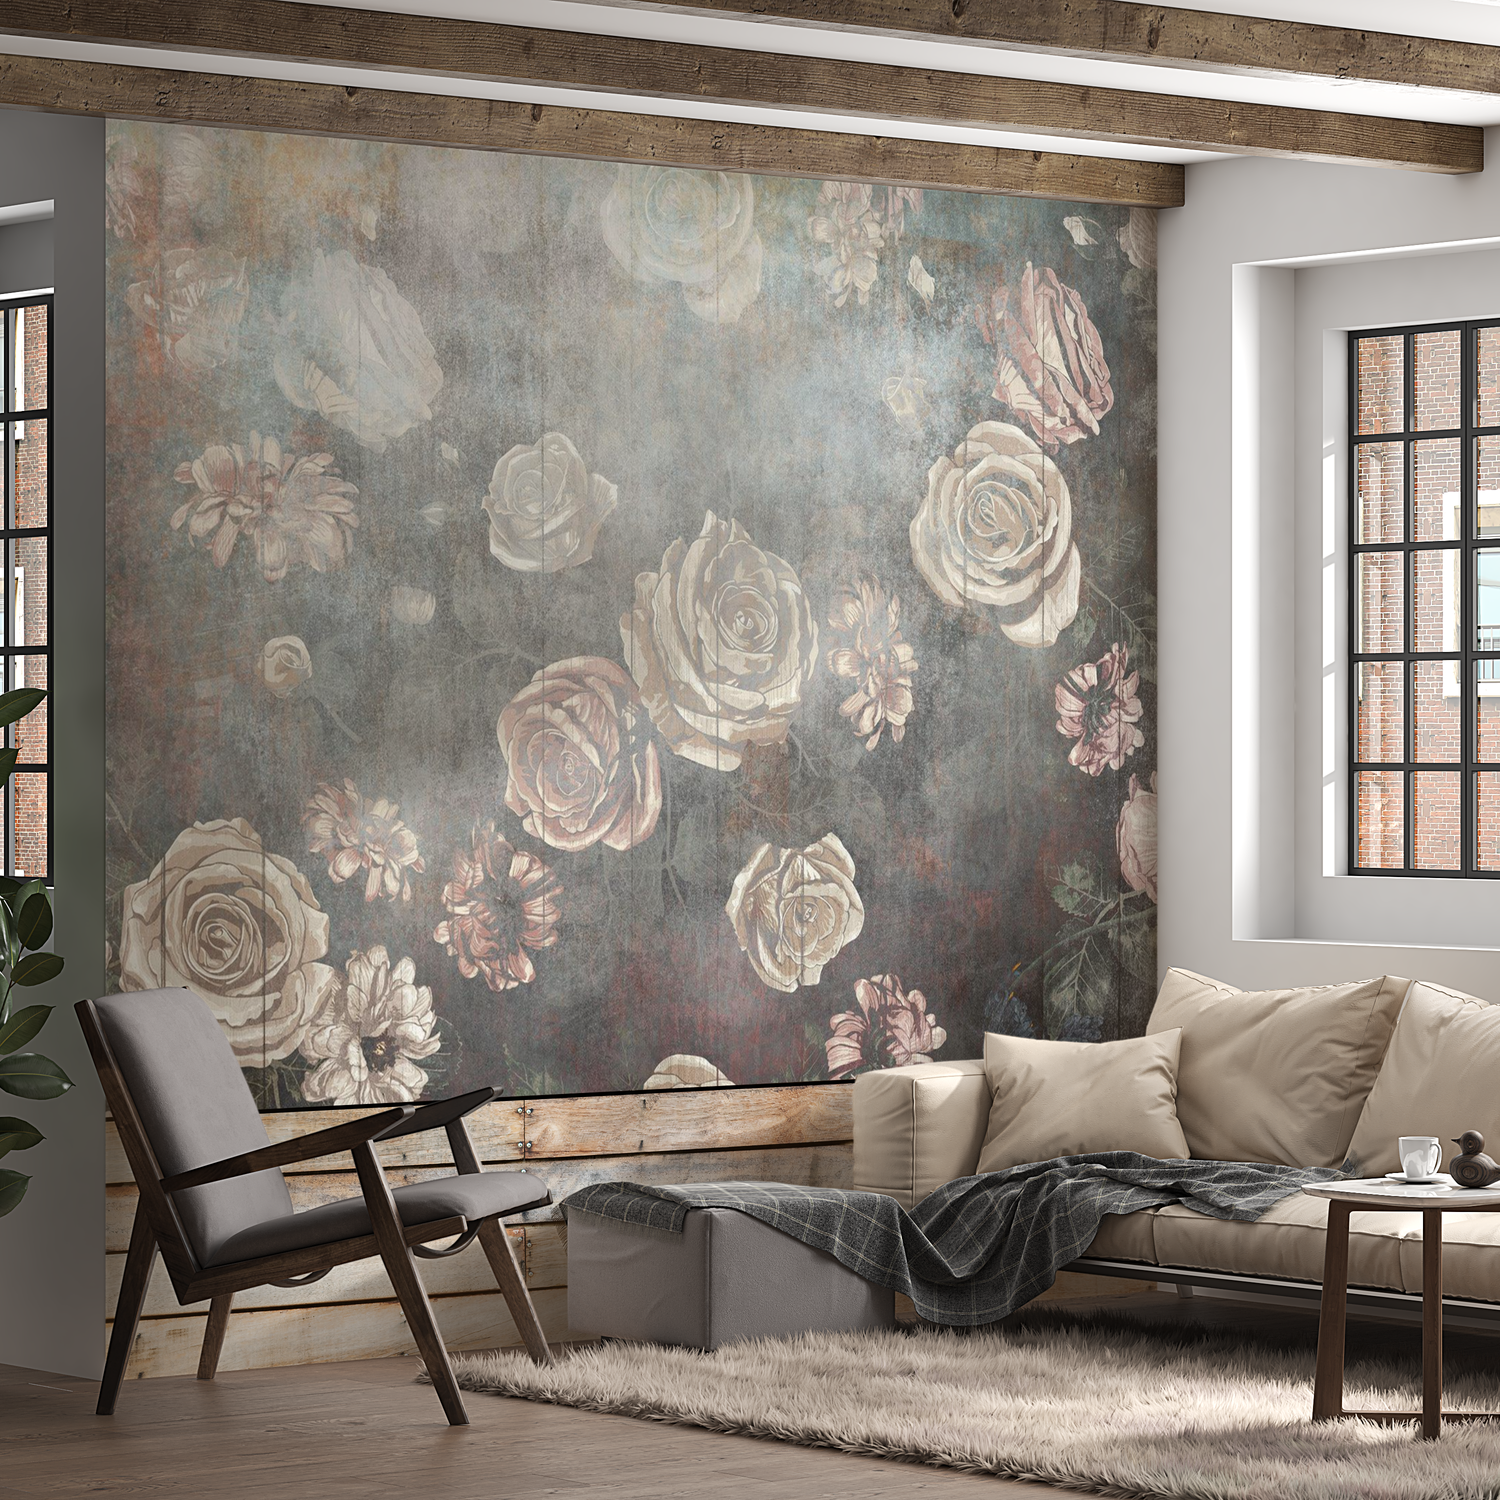 Peel & Stick Floral Wall Mural - Misty Roses - Removable Wallpaper 38"Wx27"H